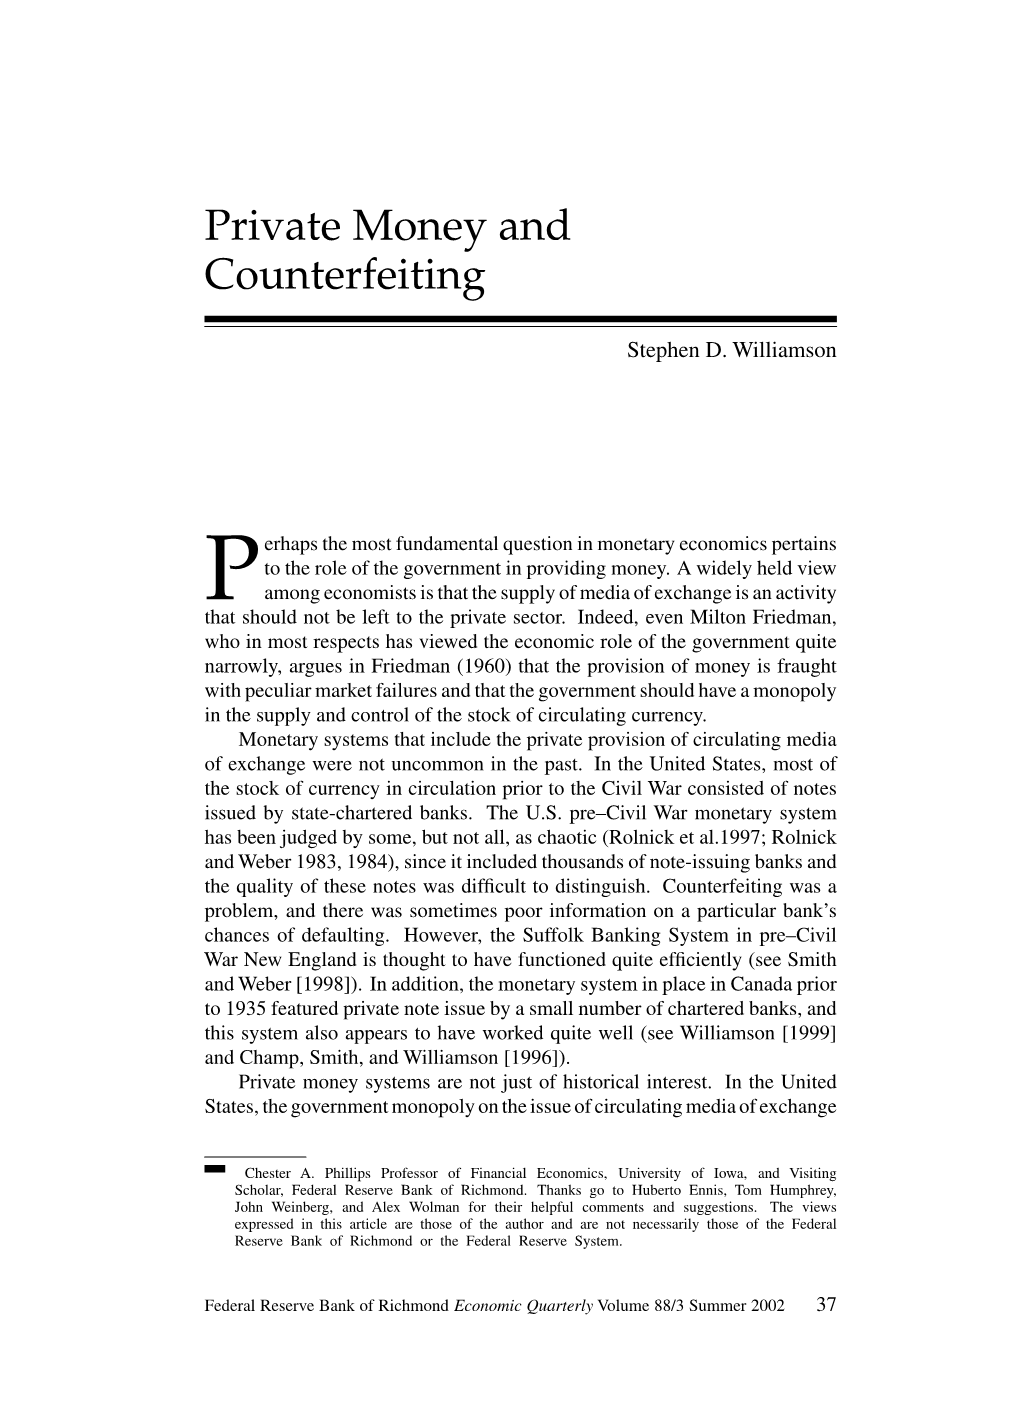 Private Money and Counterfeiting